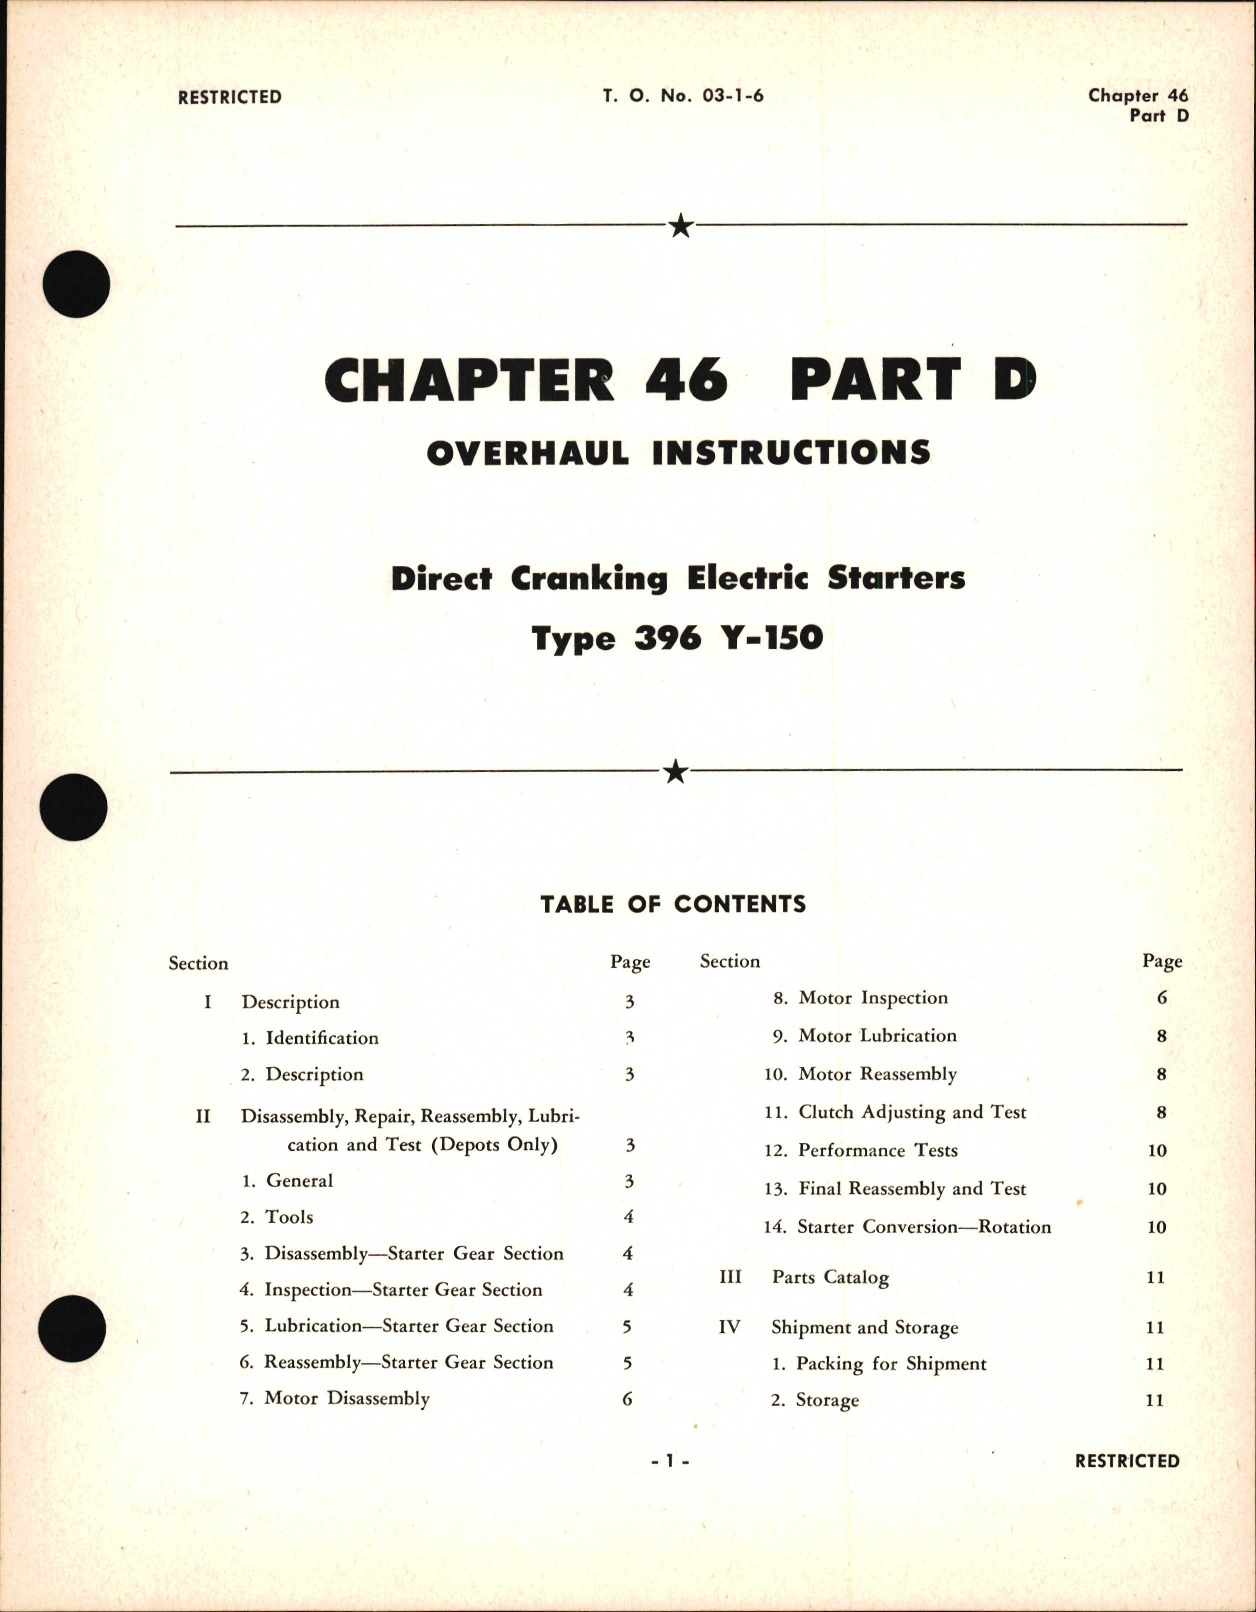 Sample page 1 from AirCorps Library document: Overhaul Instructions for Direct Cranking Electric Starters, Chapter 46 Part D